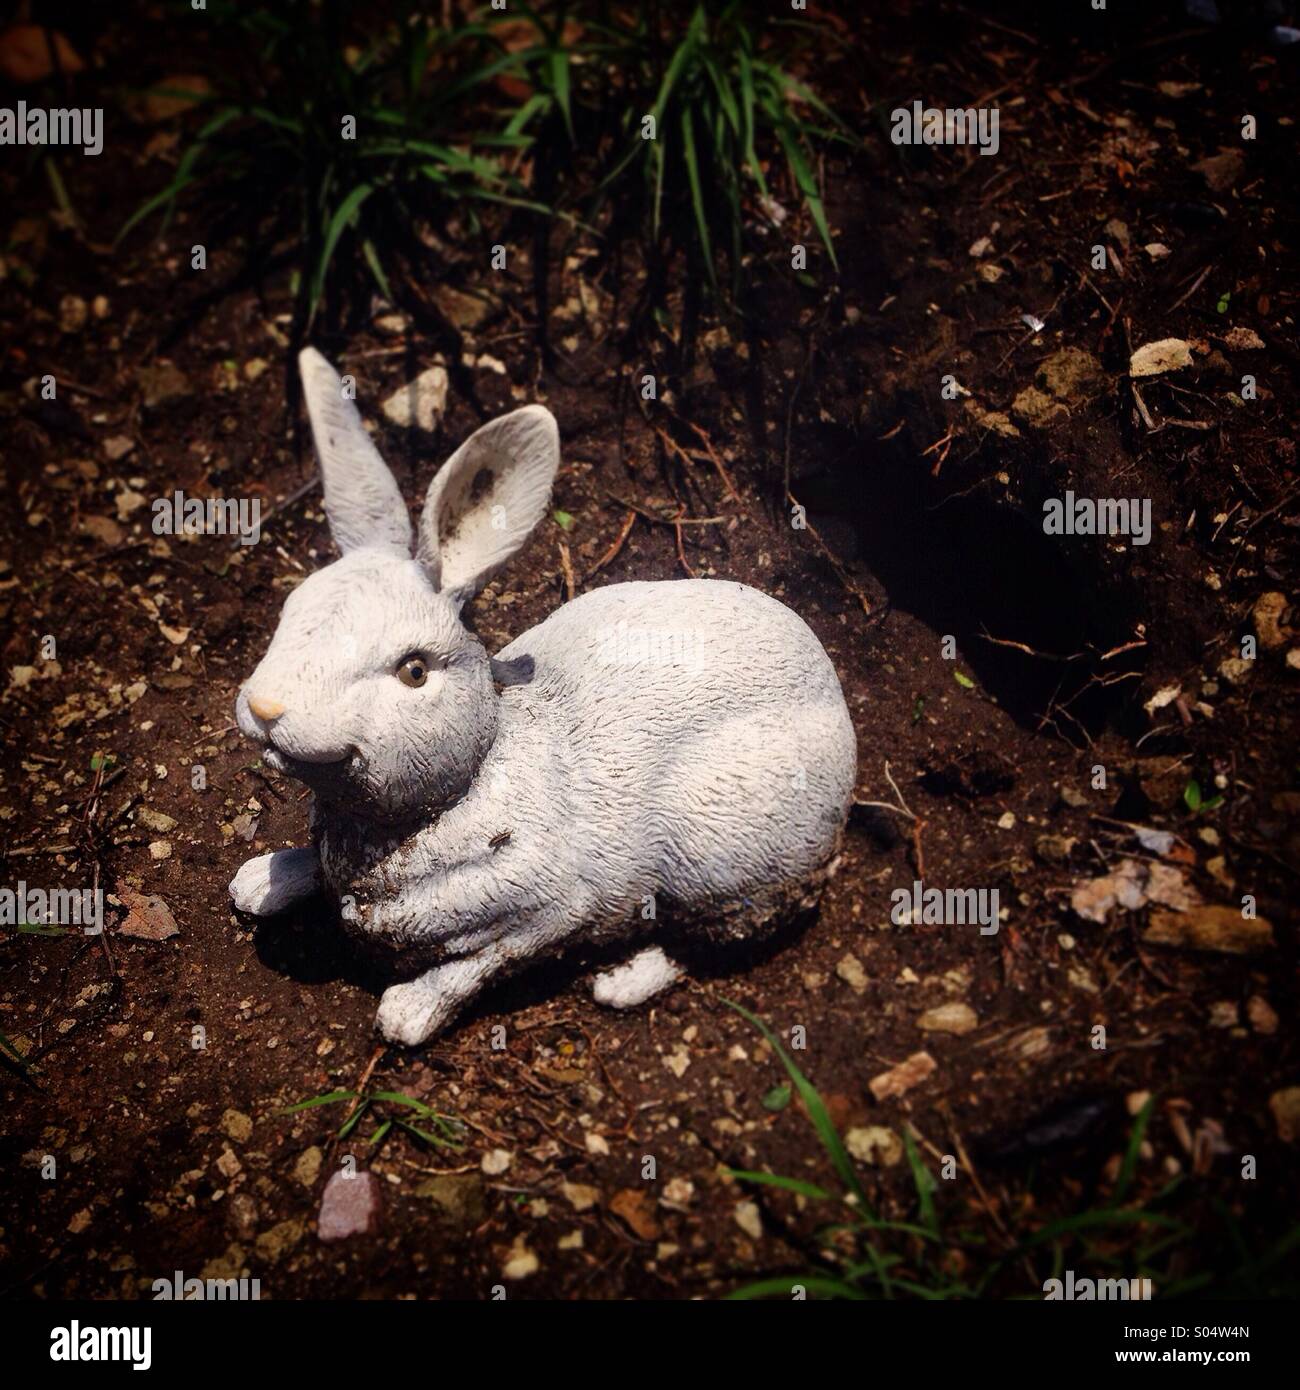 An sculpture of a white rabbit in the rabbit hole decorates a tourists trail in Peña de Bernal, Queretaro state, Mexico Stock Photo